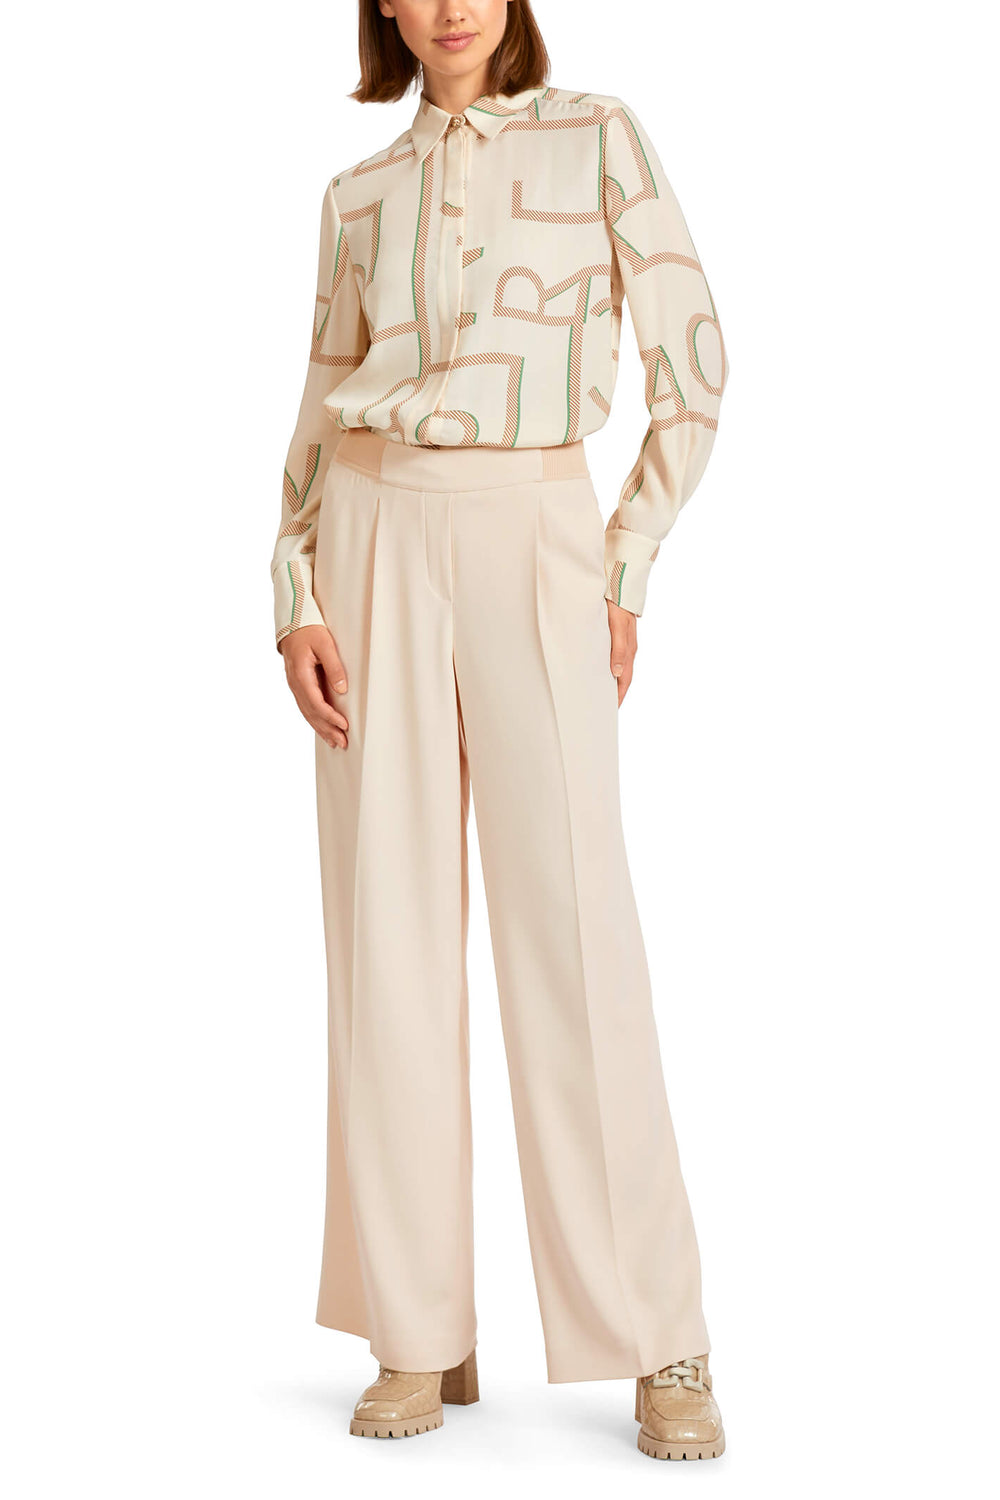 Marc Cain Collection UC 81.19 W56 Creme Wide Leg Trousers - Olivia Grace Fashion